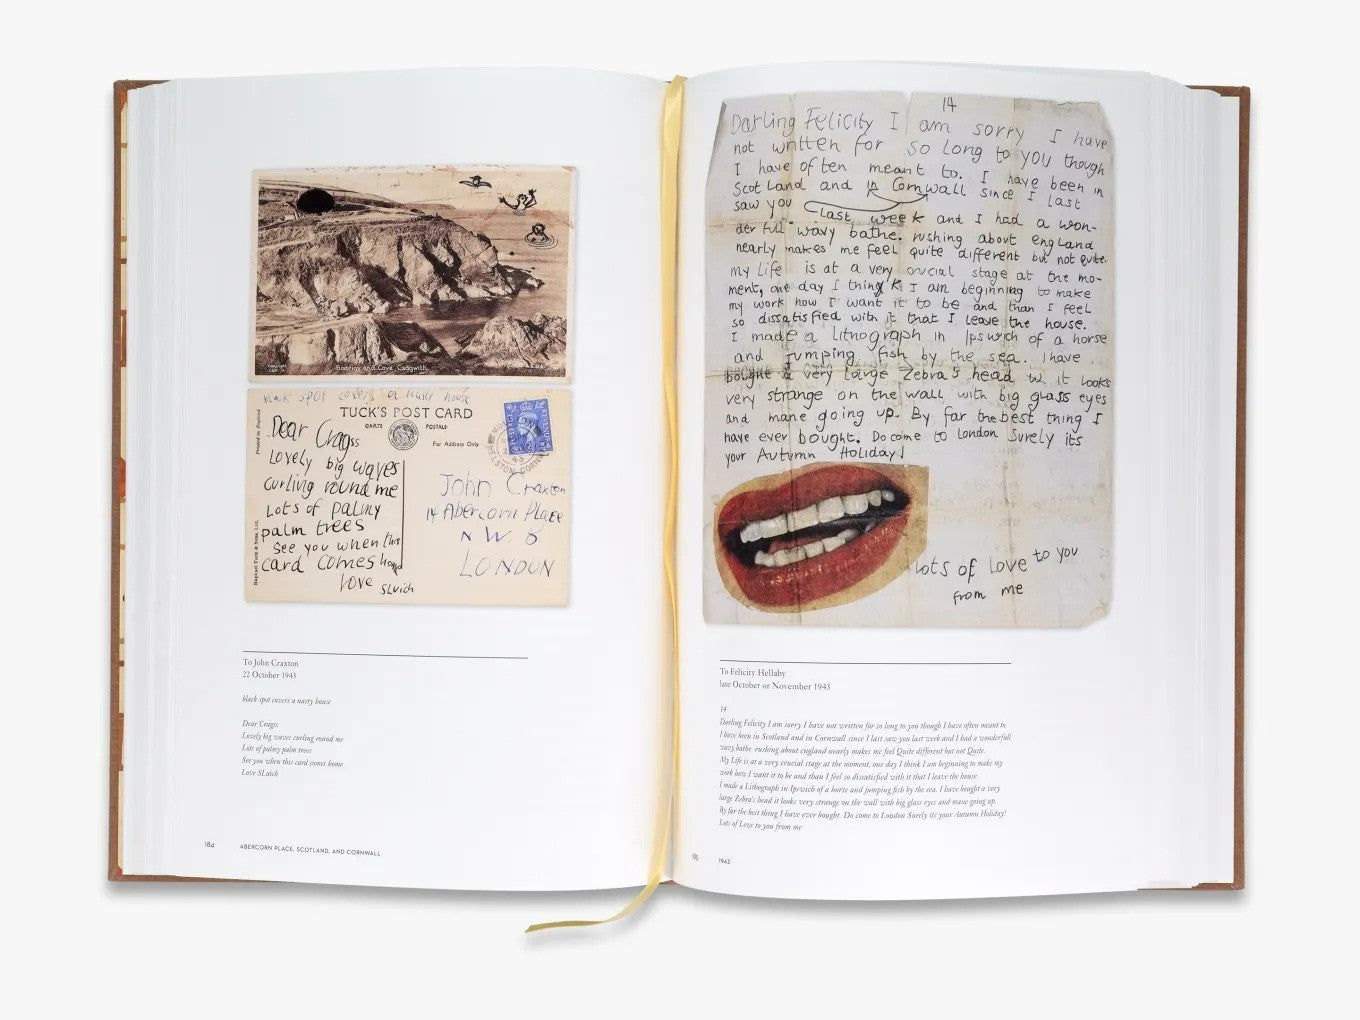 Love Lucian: The Letters of Lucian Freud, 1939 - 1954